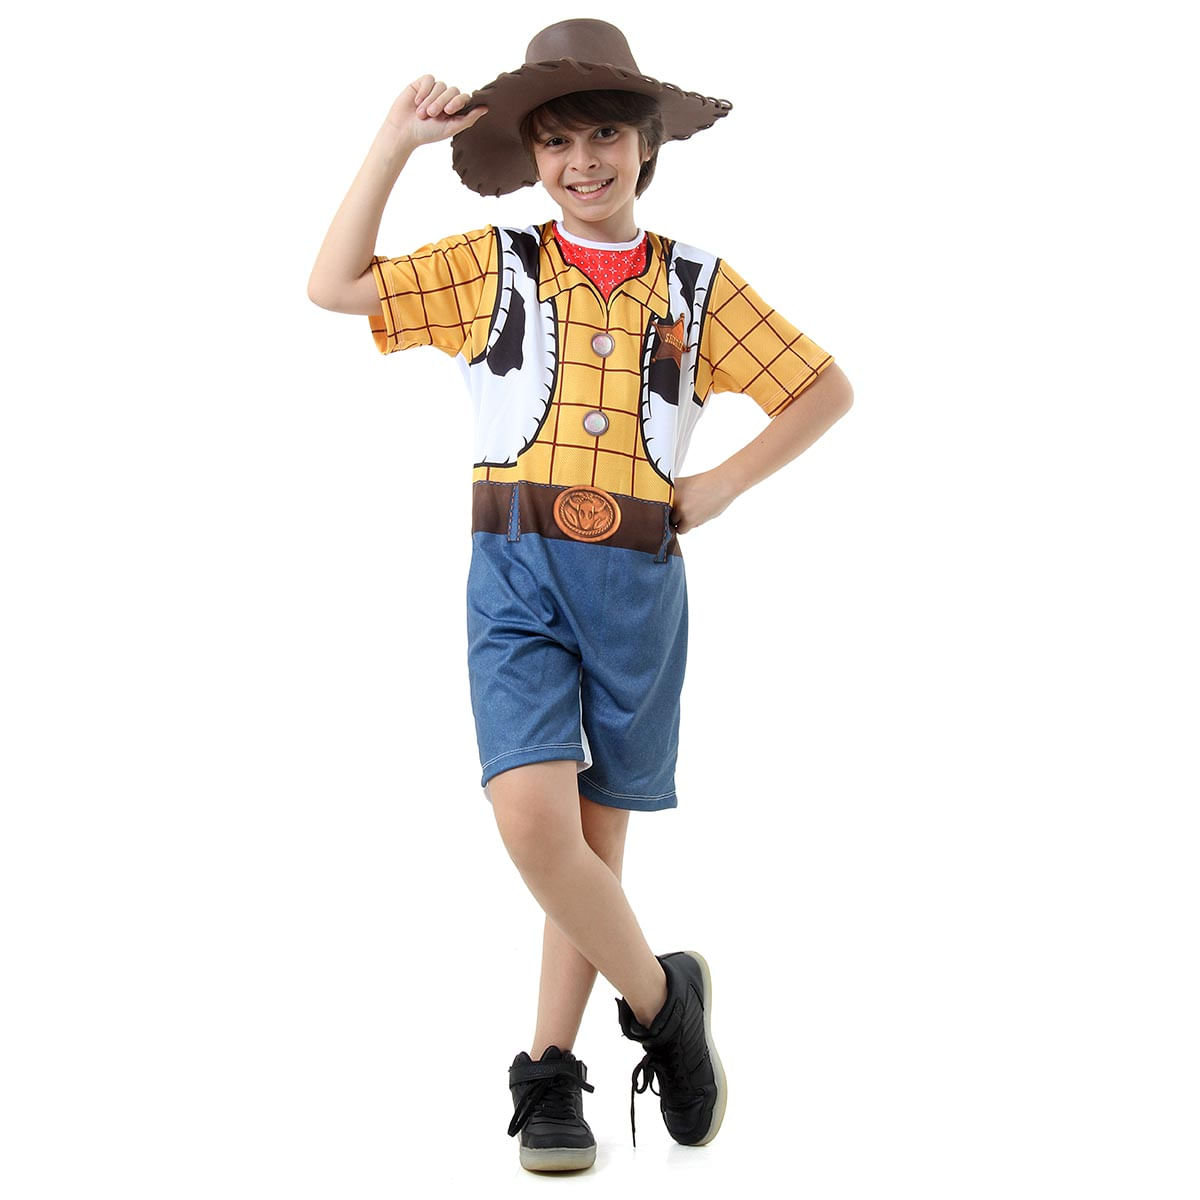 Fantasia Woody Curto Infantil - Toy Story P / UNICA